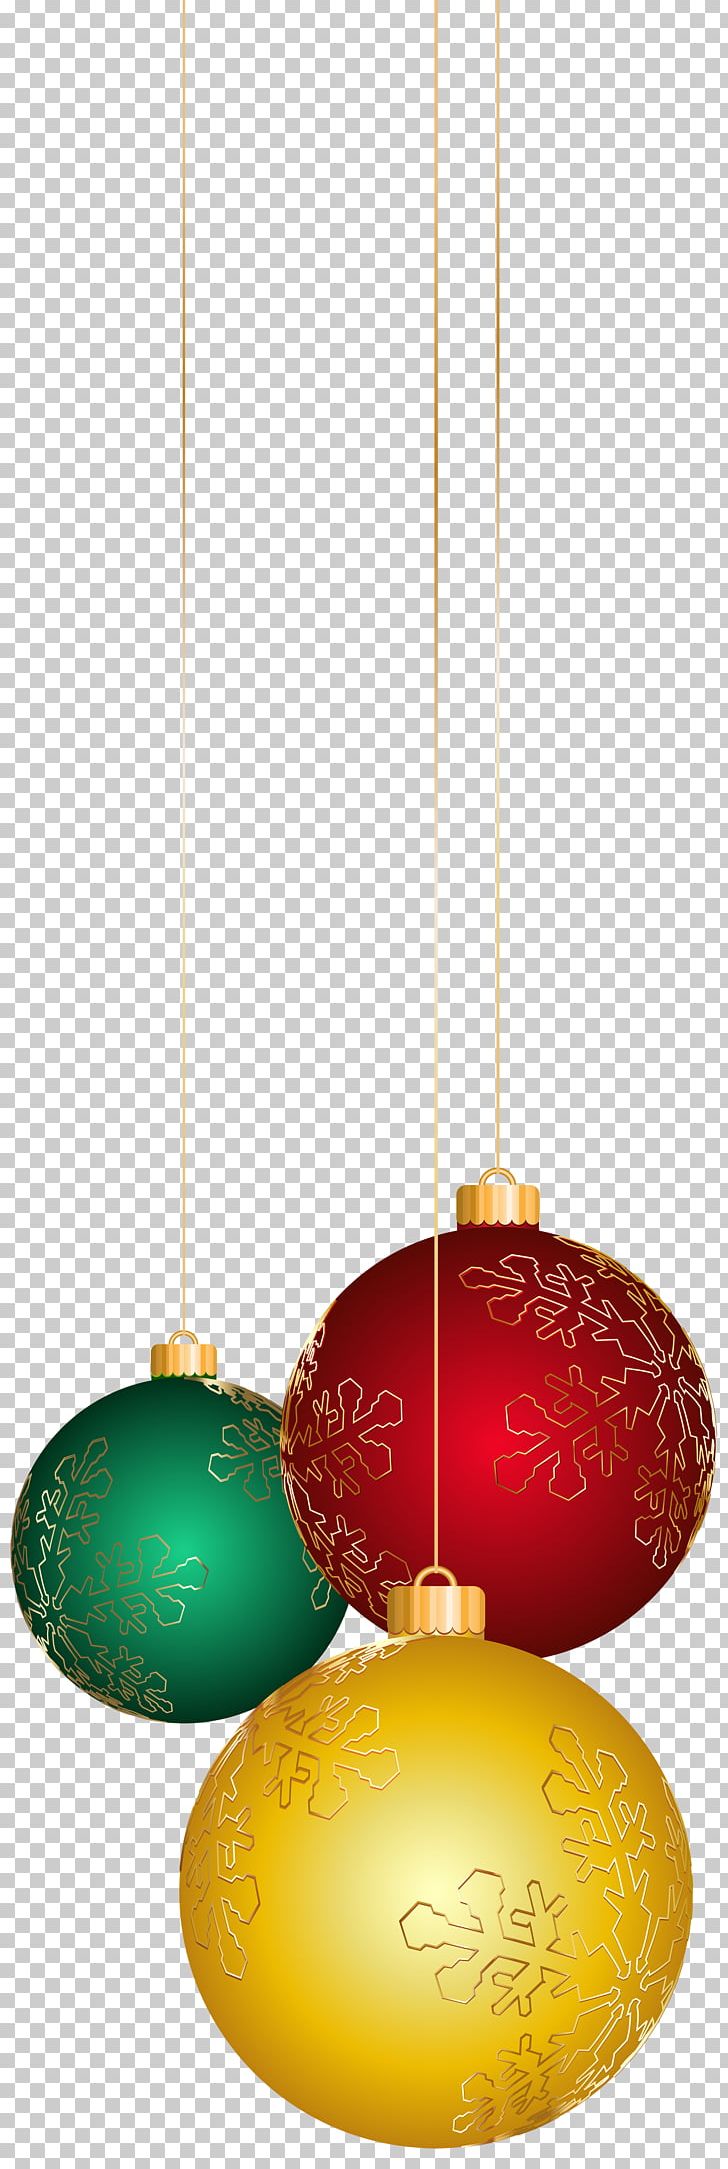 Lossless Compression File Formats Computer File PNG, Clipart, Balls, Blog, Christmas, Christmas Ball, Christmas Clipart Free PNG Download